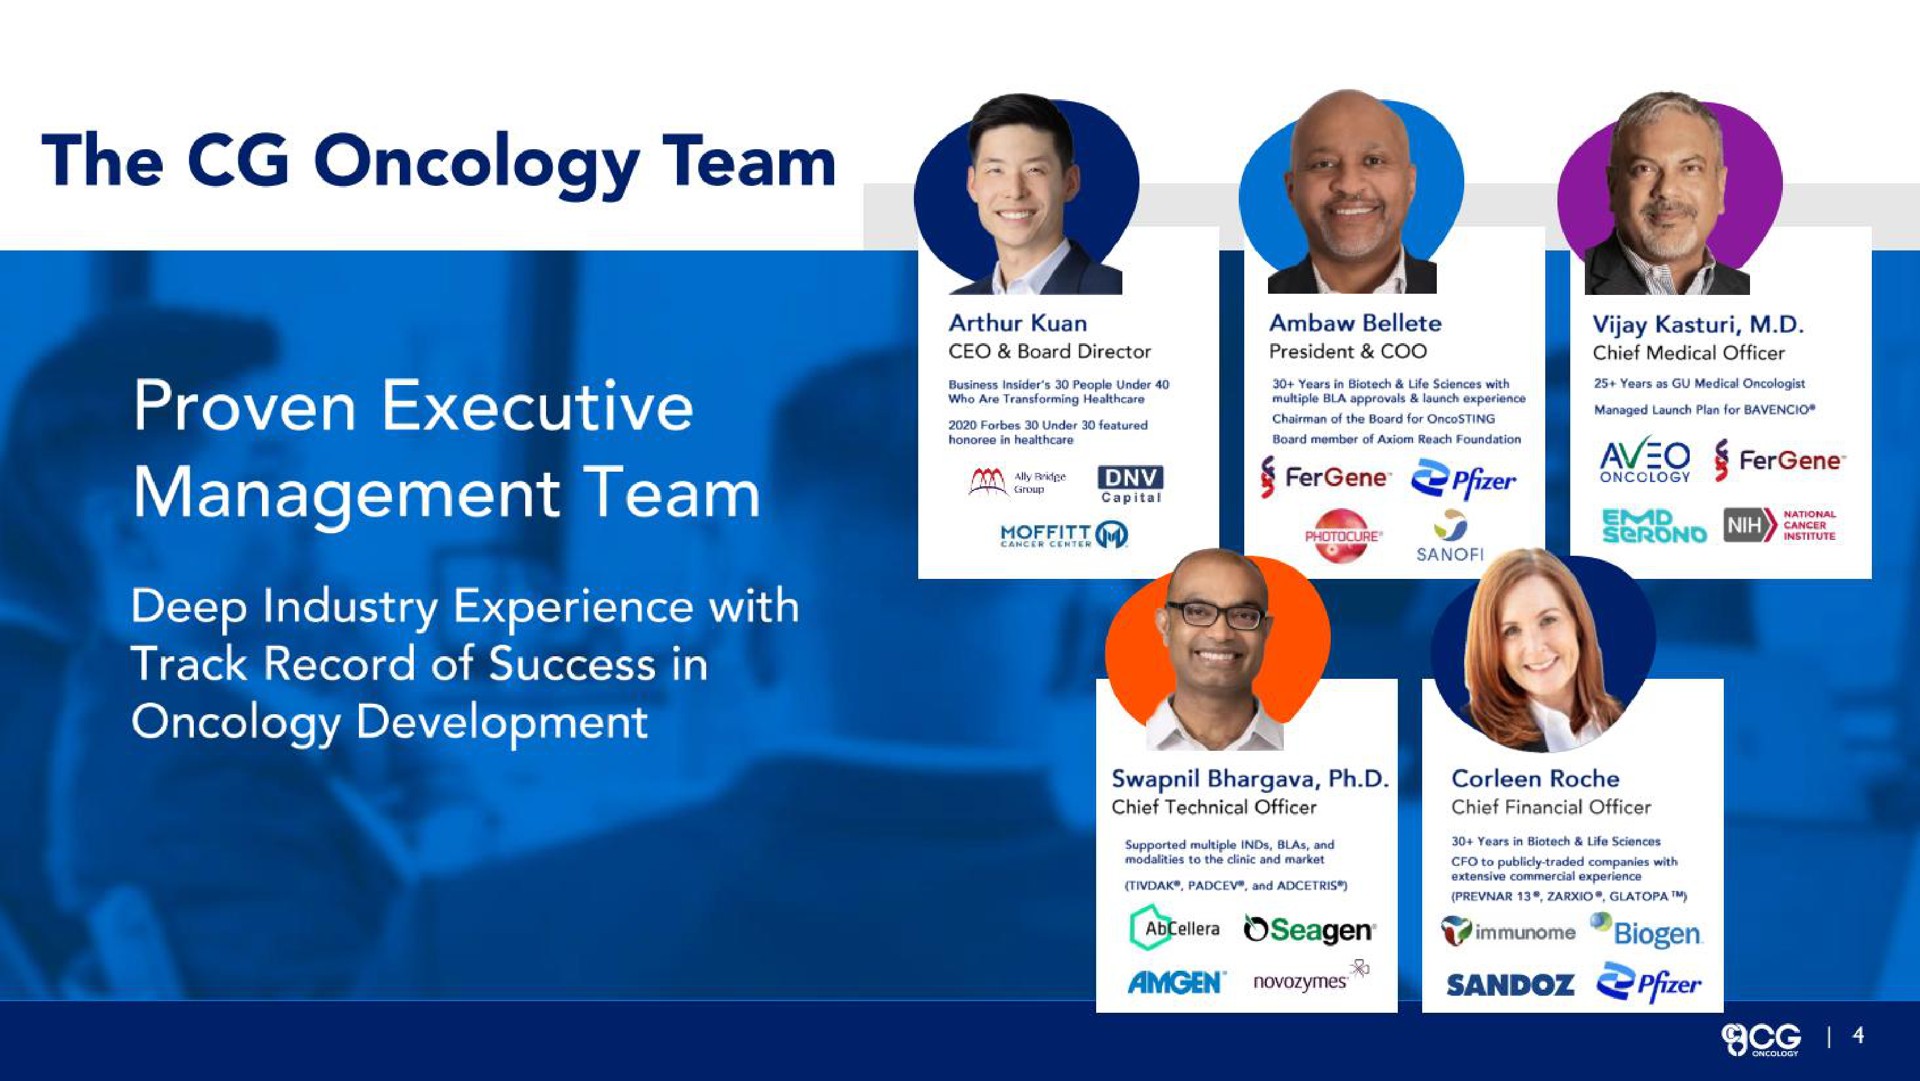 the oncology team proven executive management team | CG Oncology